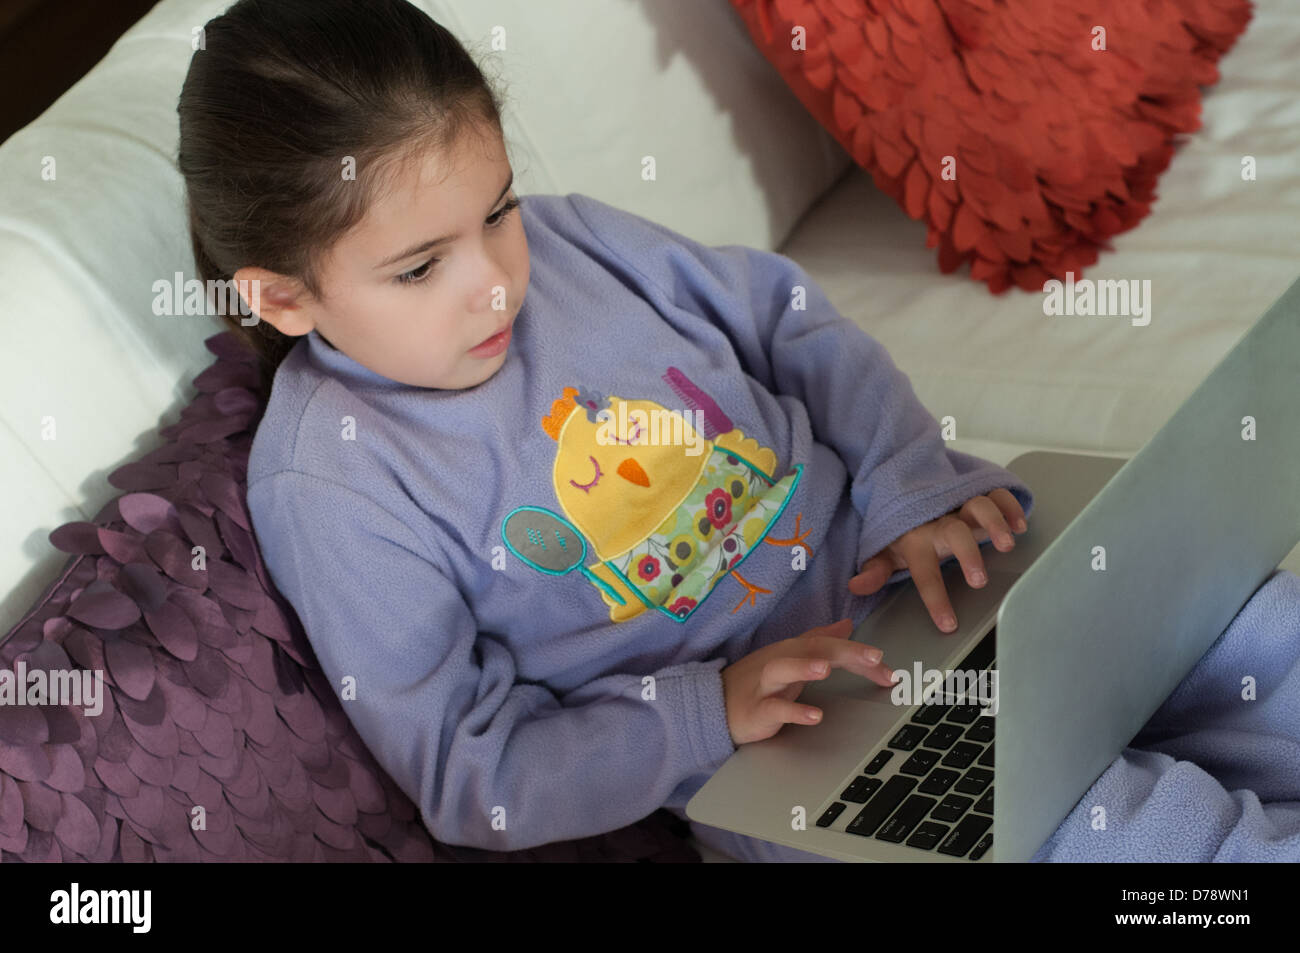 Child and laptop Stock Photo